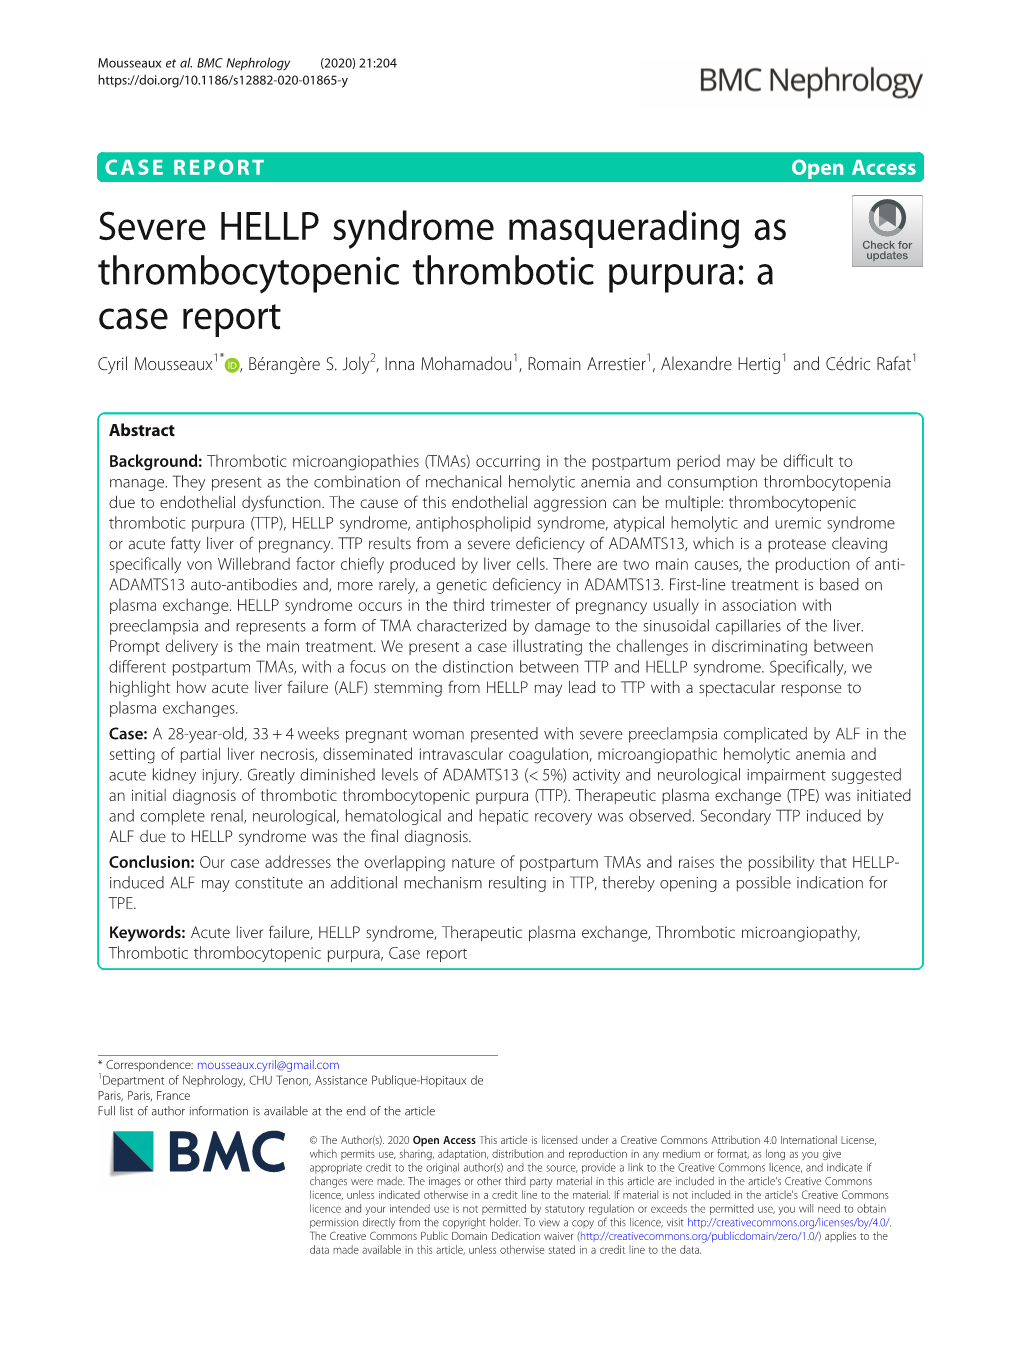 Severe HELLP Syndrome Masquerading As Thrombocytopenic Thrombotic Purpura: a Case Report Cyril Mousseaux1* , Bérangère S